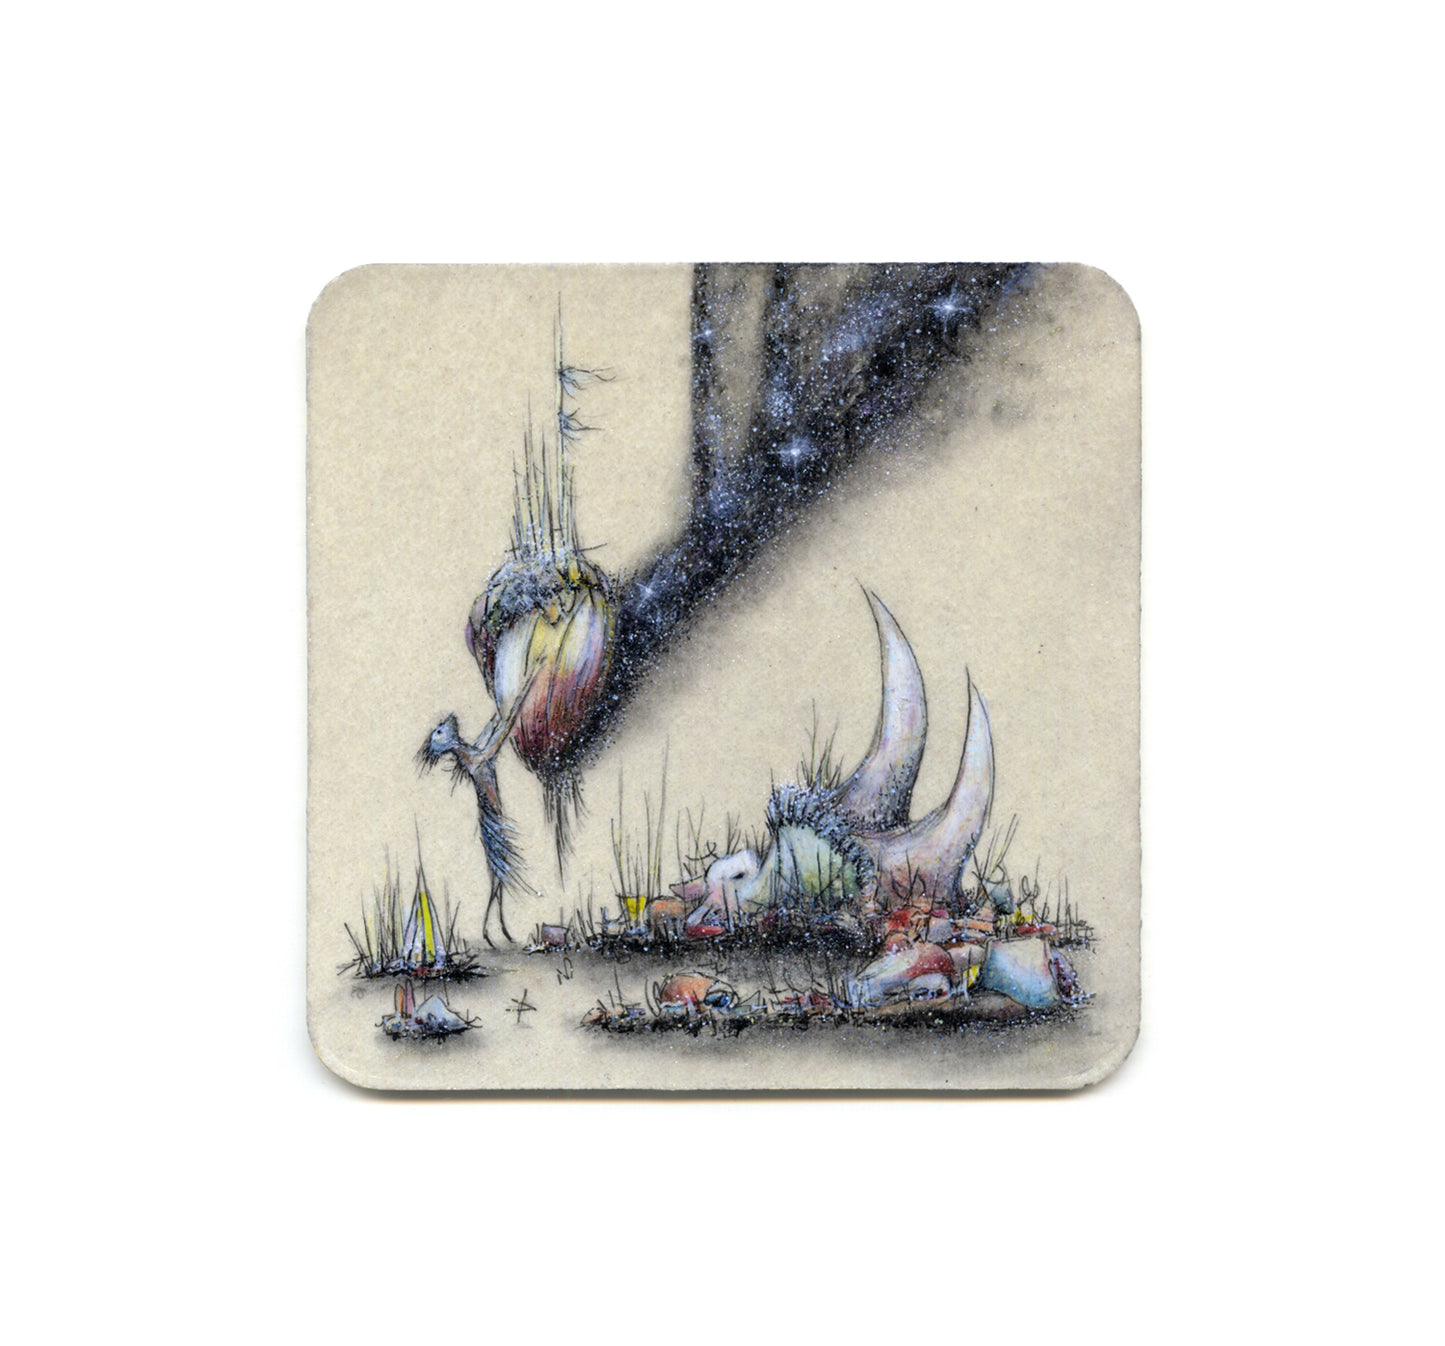 S2 Jeannie Lynn Paske - 1 Outdated Coaster